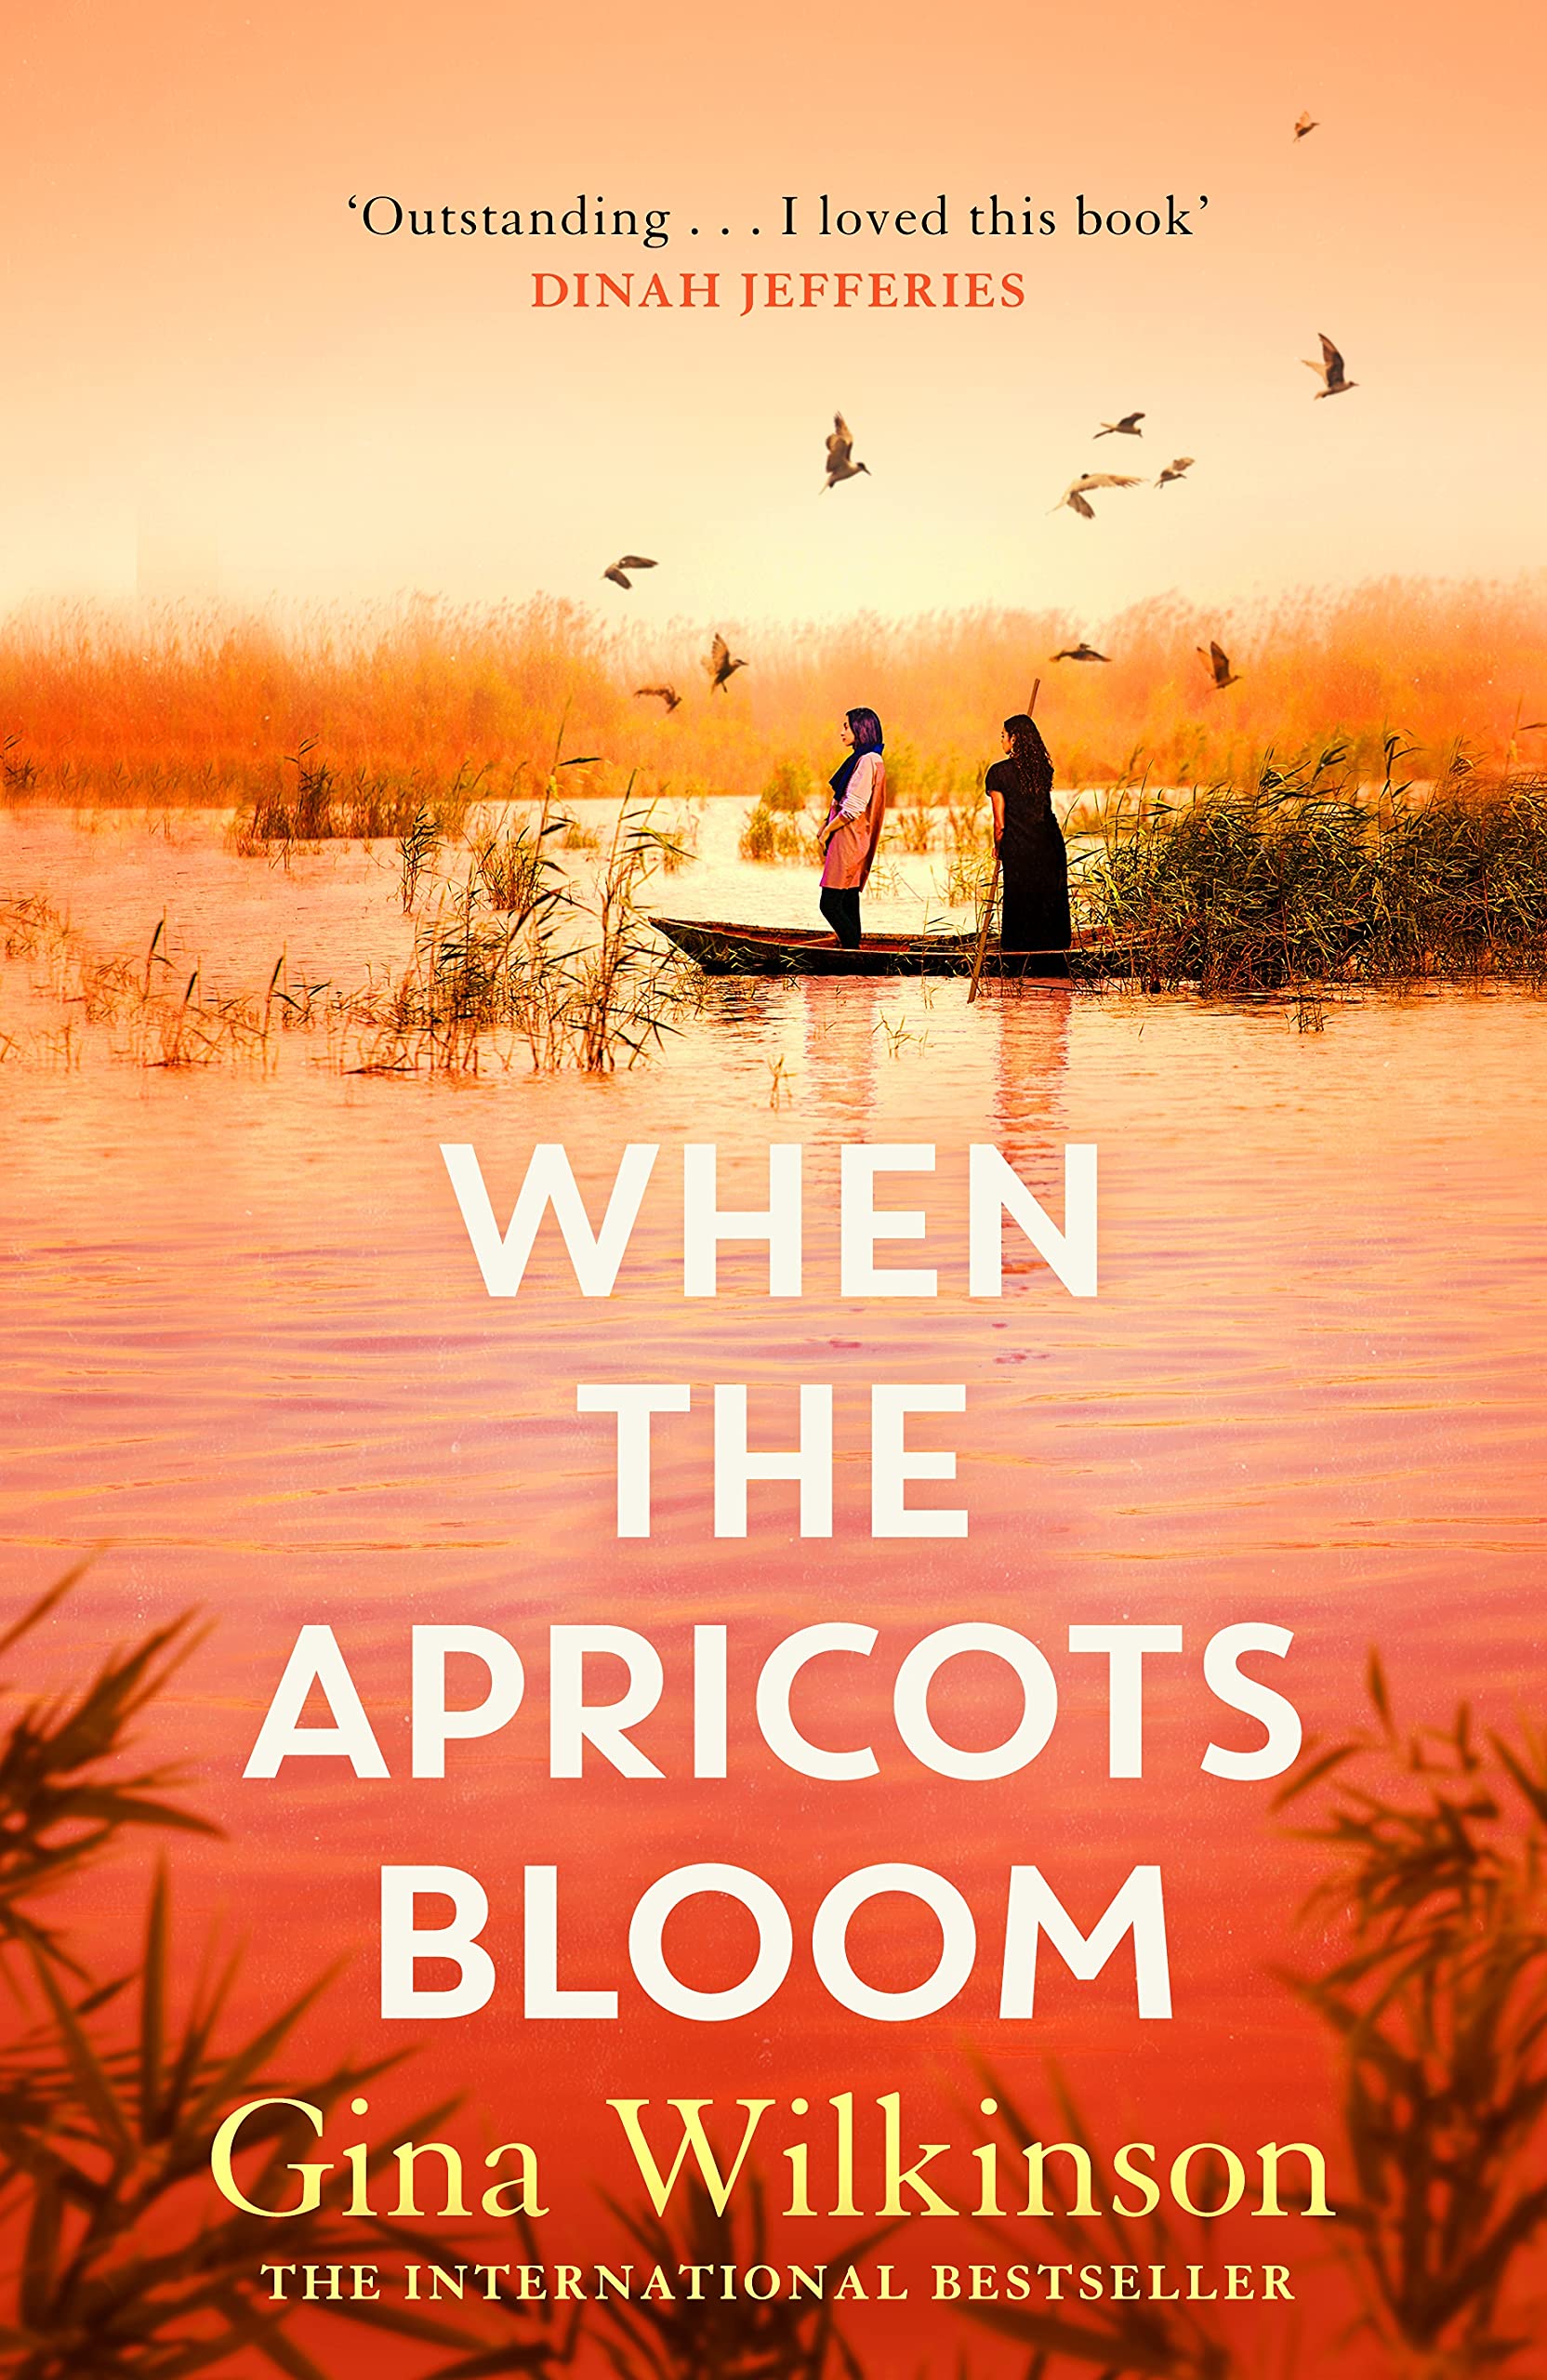 When the Apricots Bloom | Gina Wilkinson